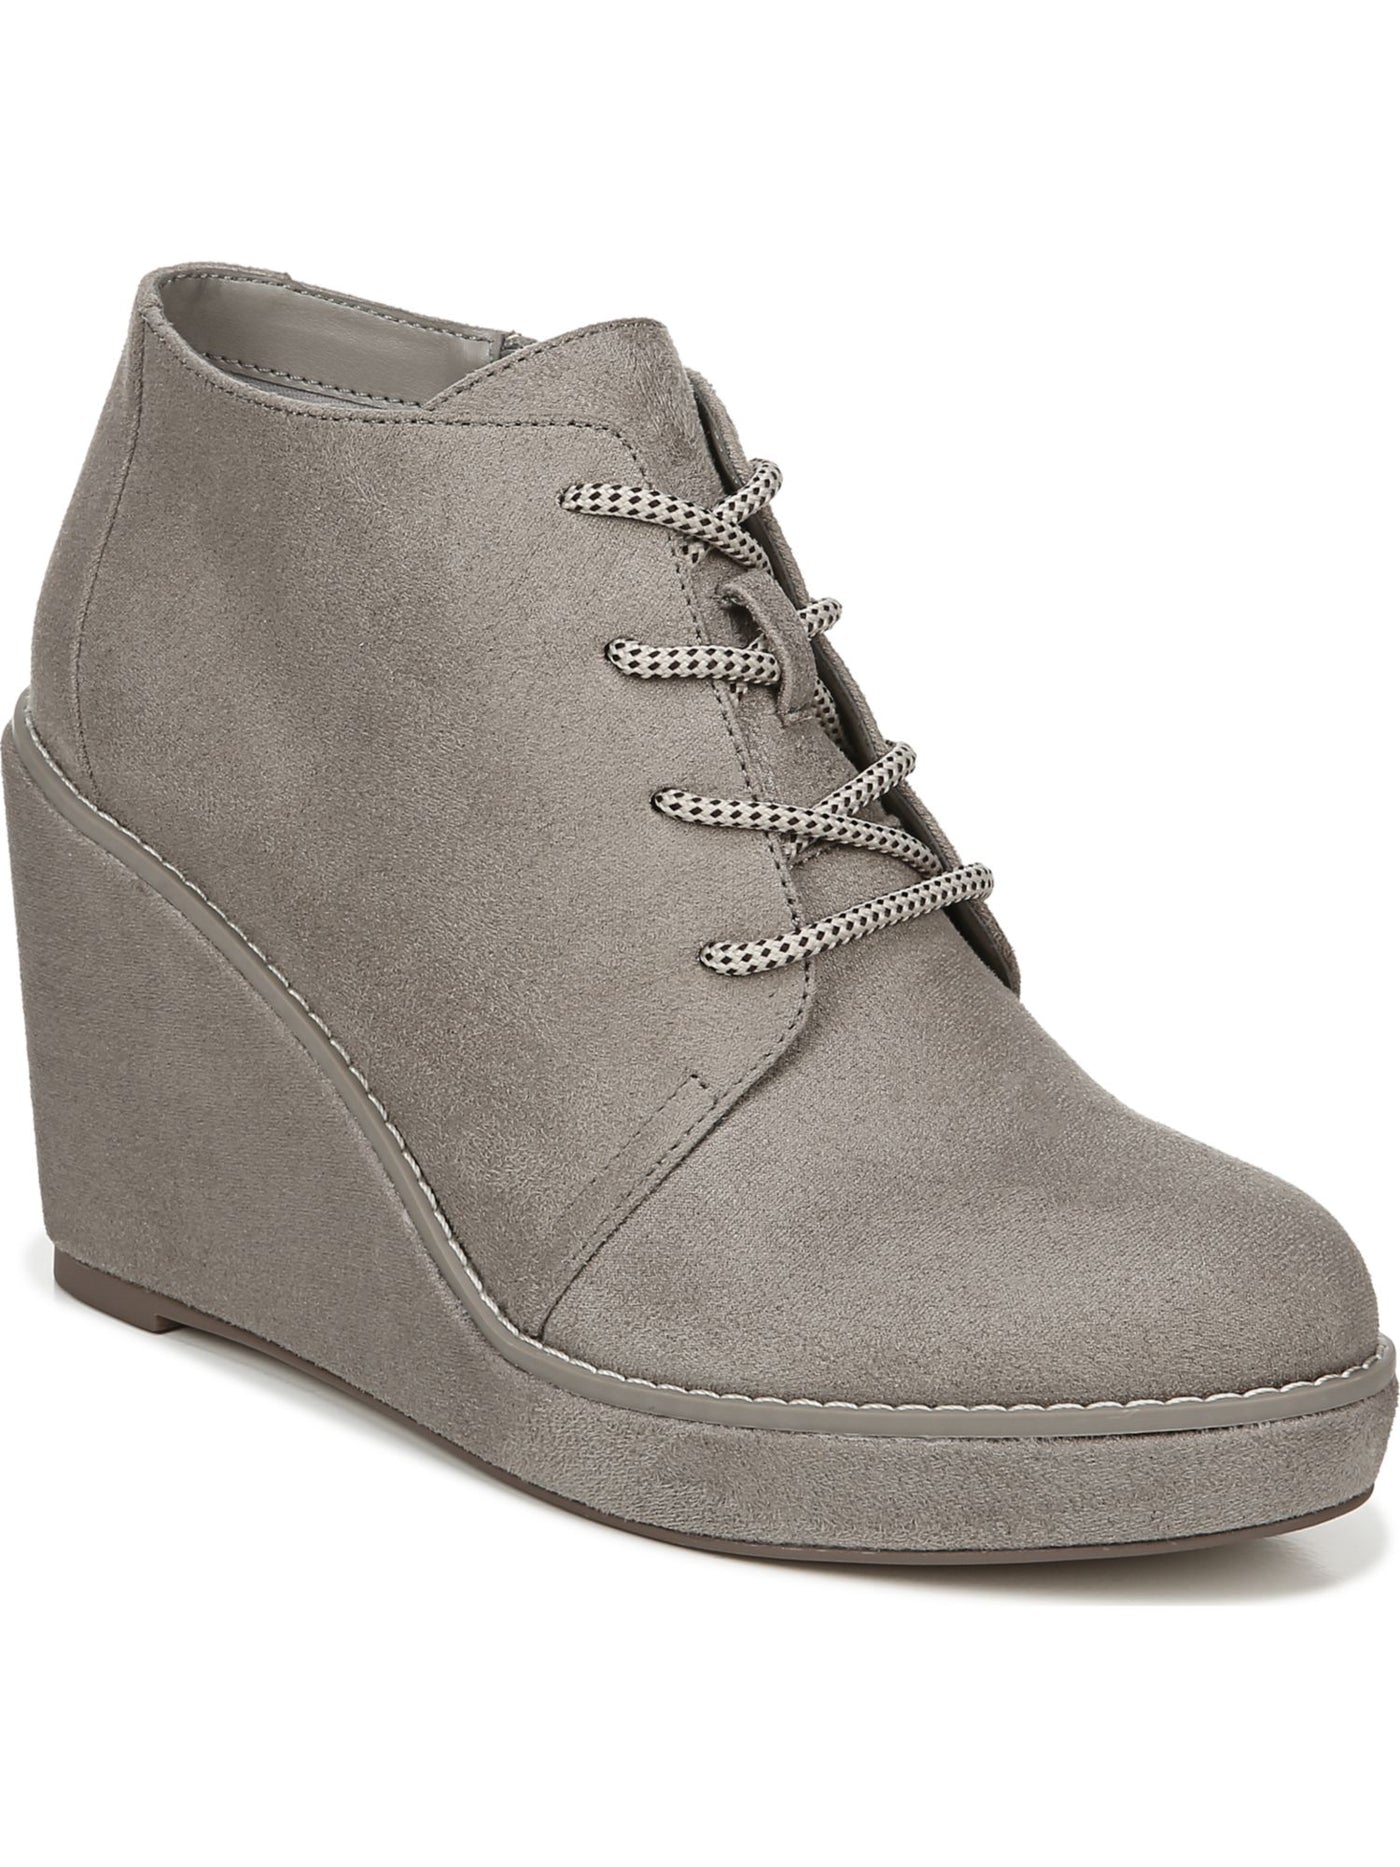 CARLOS BY CARLOS SANTANA Womens Gray Lace Up Closure Cold Weather Wills Almond Toe Wedge Zip-Up Shootie 5.5 M